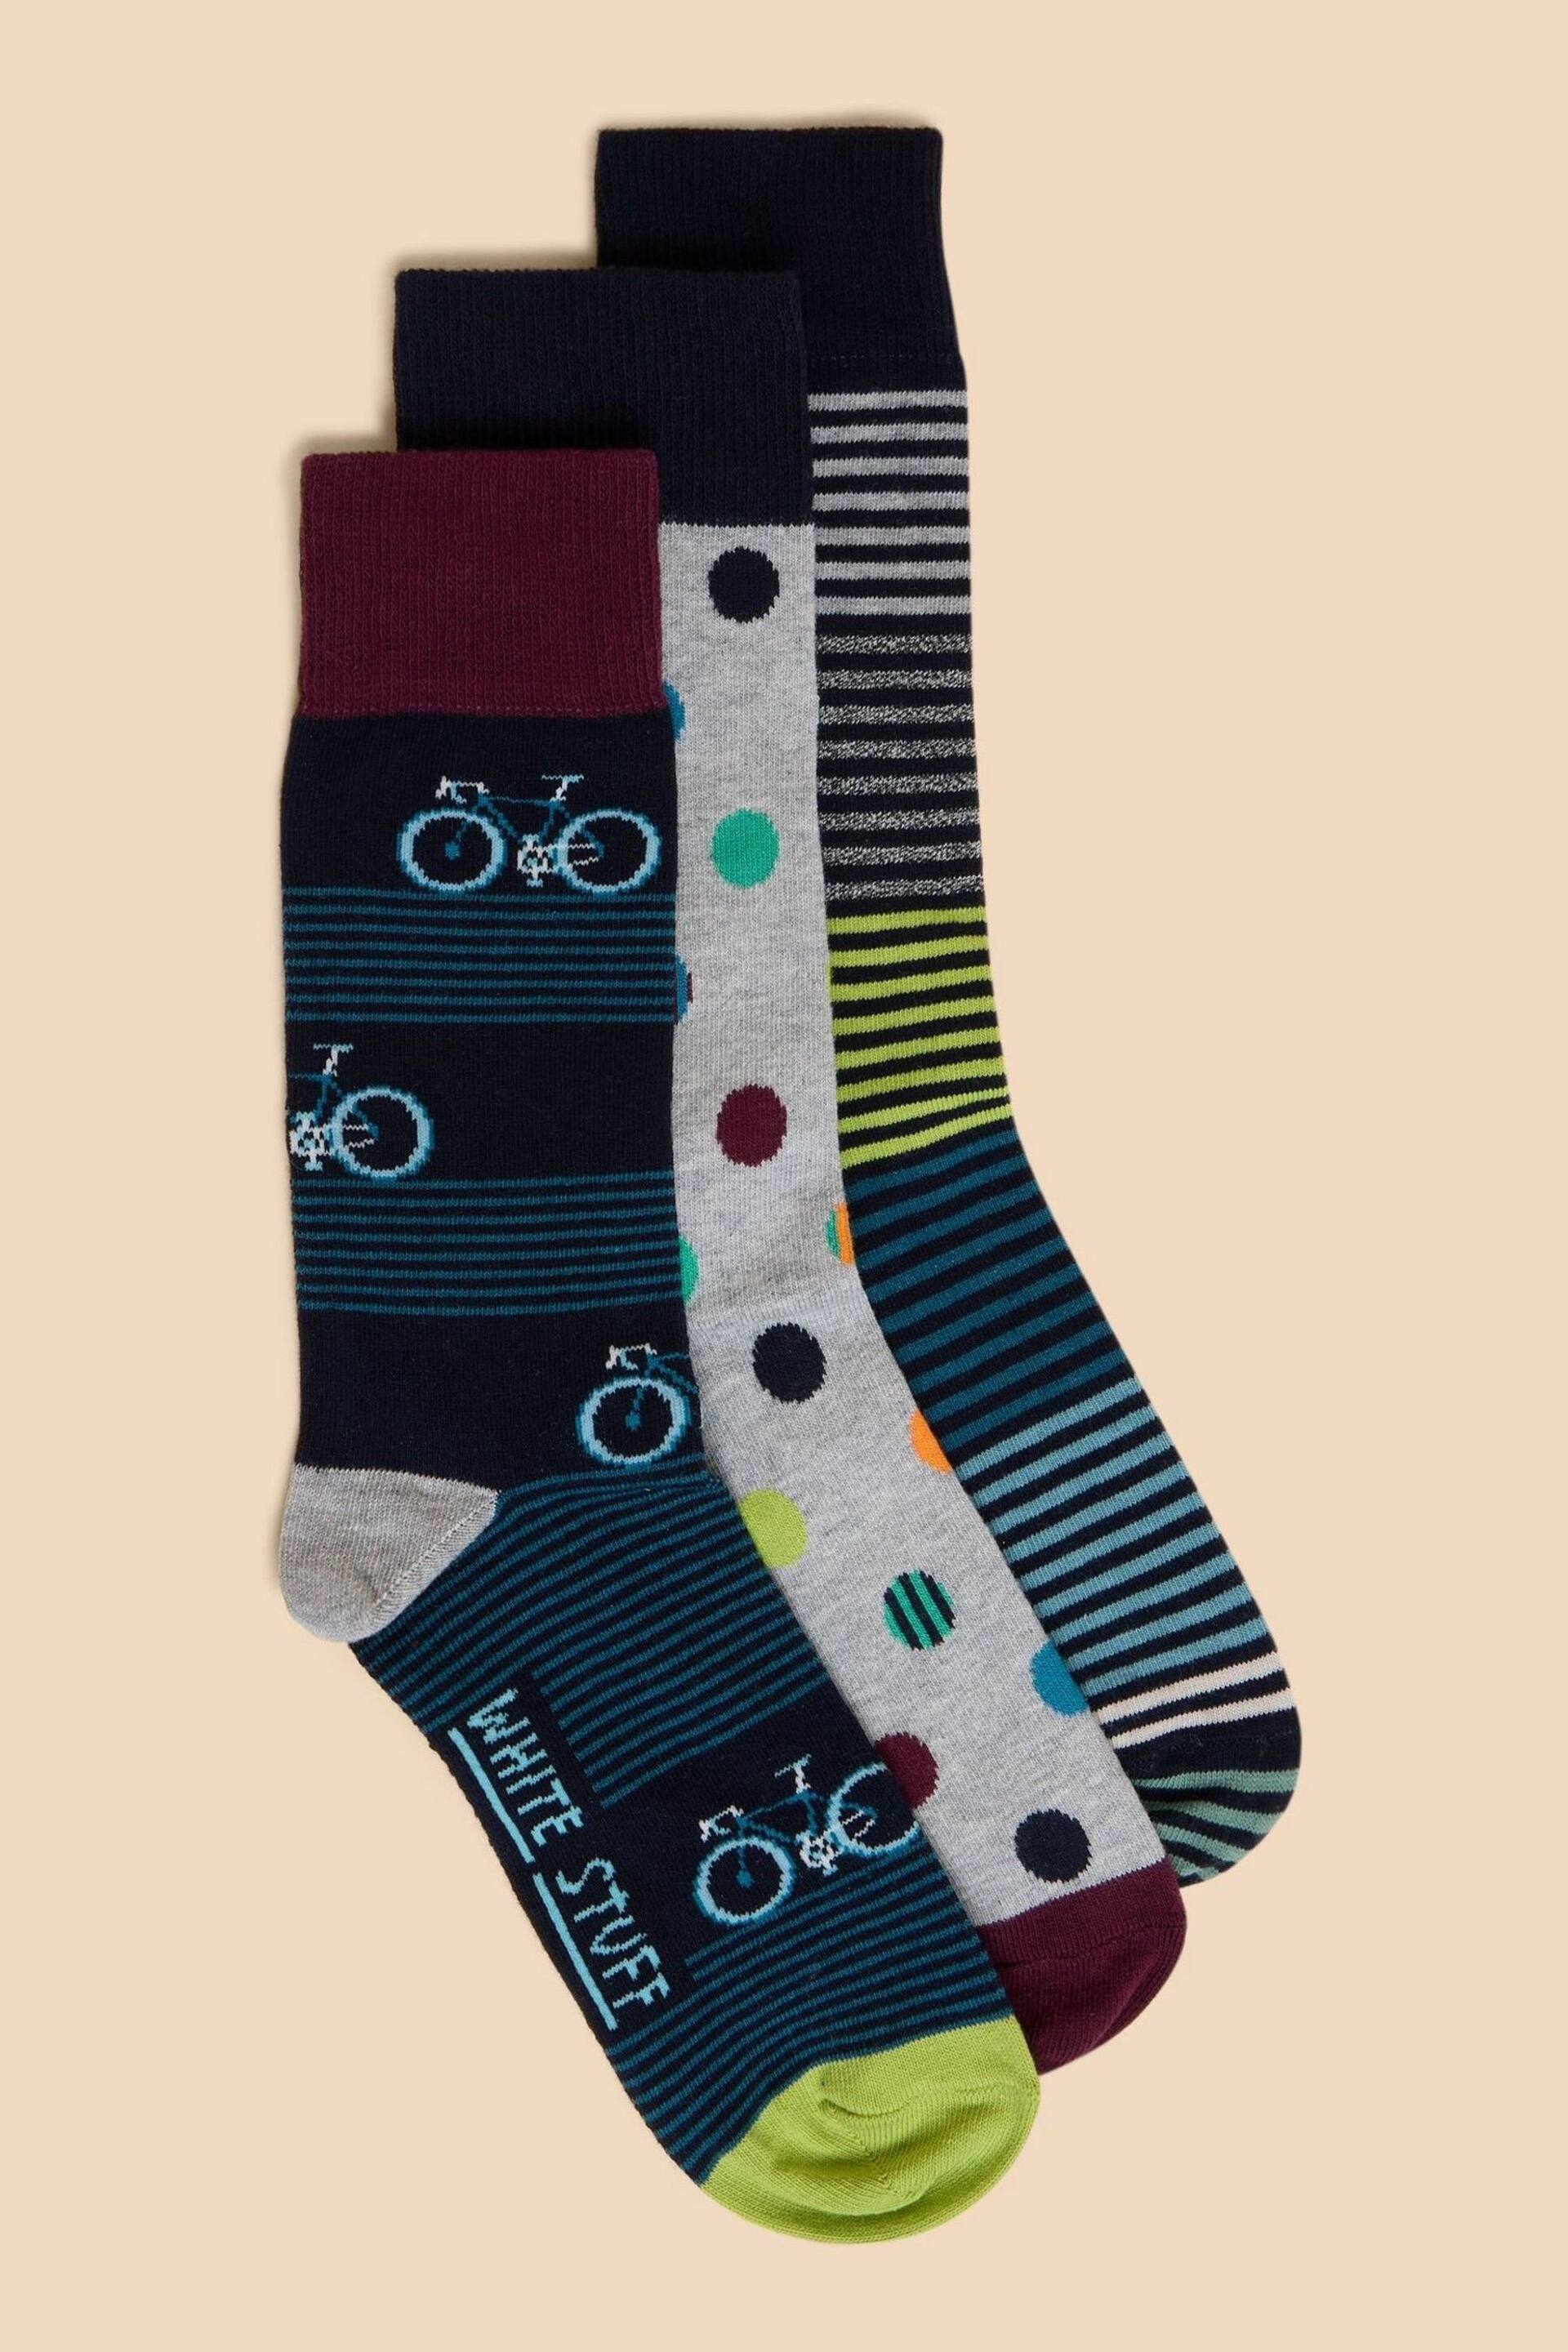 White Stuff Blue Bicycle Ankle Socks 3 Pack - Image 1 of 2